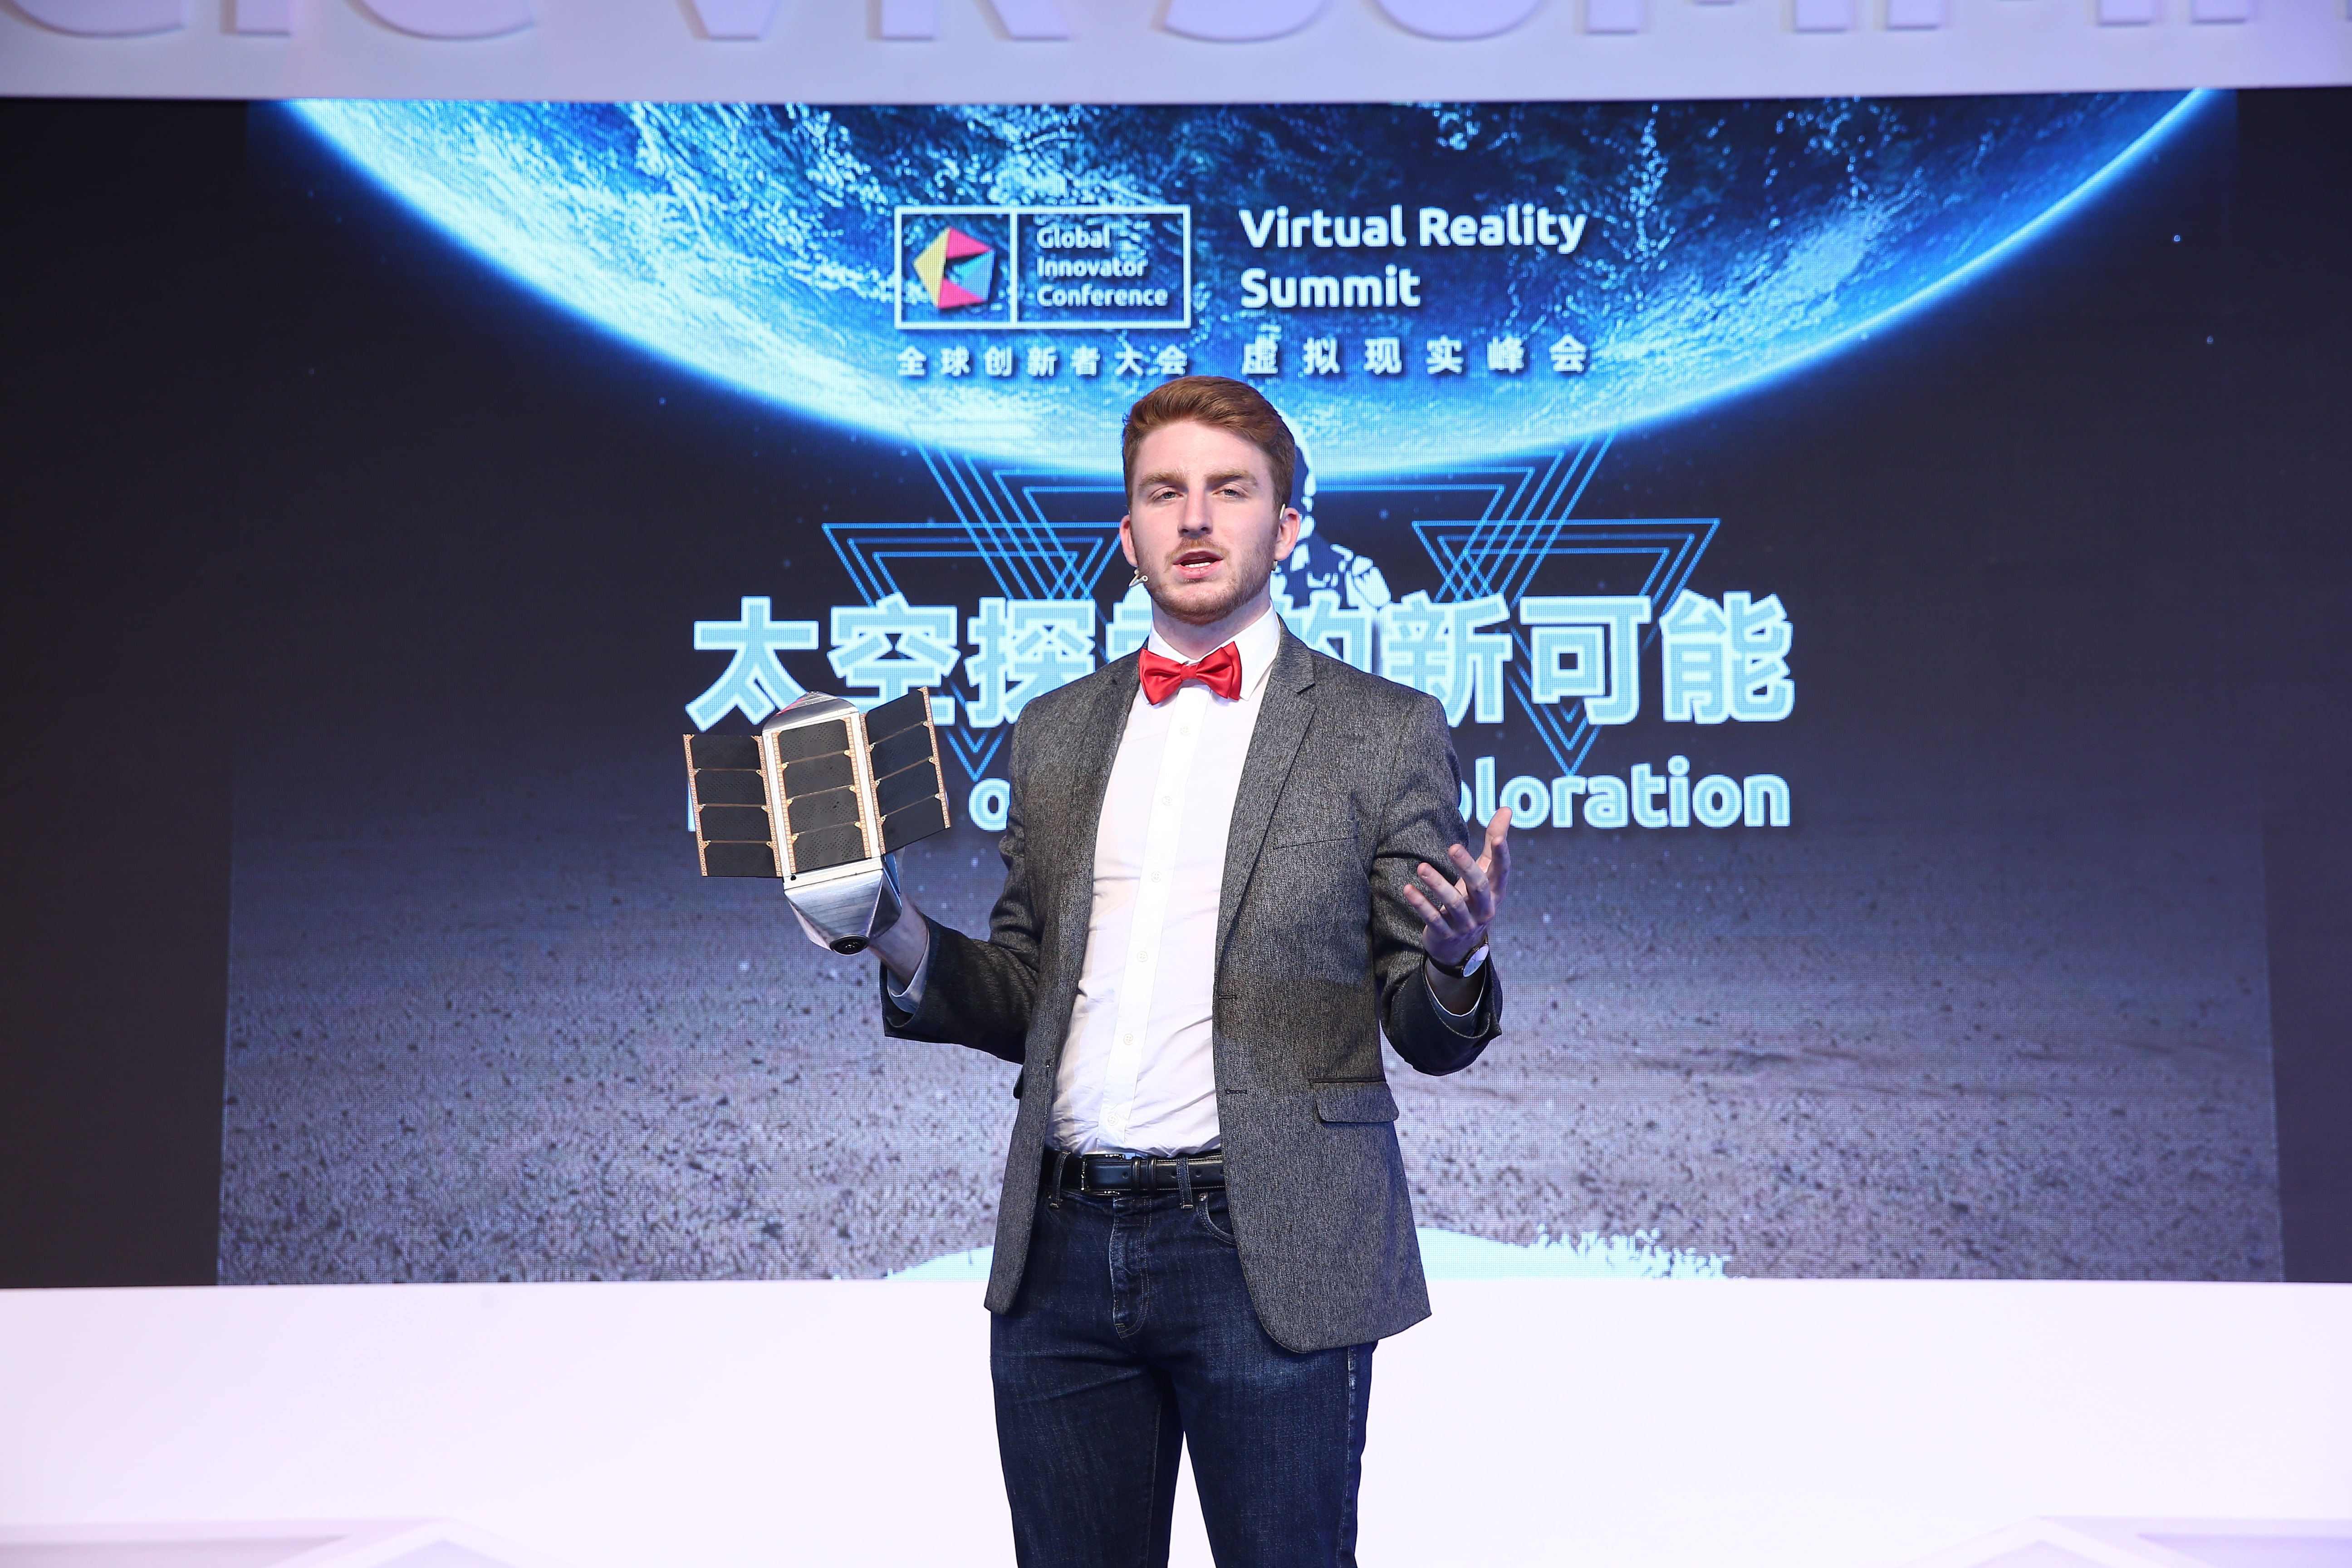 SpaceVR, CEO Ryan Holmes, holding a prototype of the worlds first virtual reality camera satellite, Overview 1.